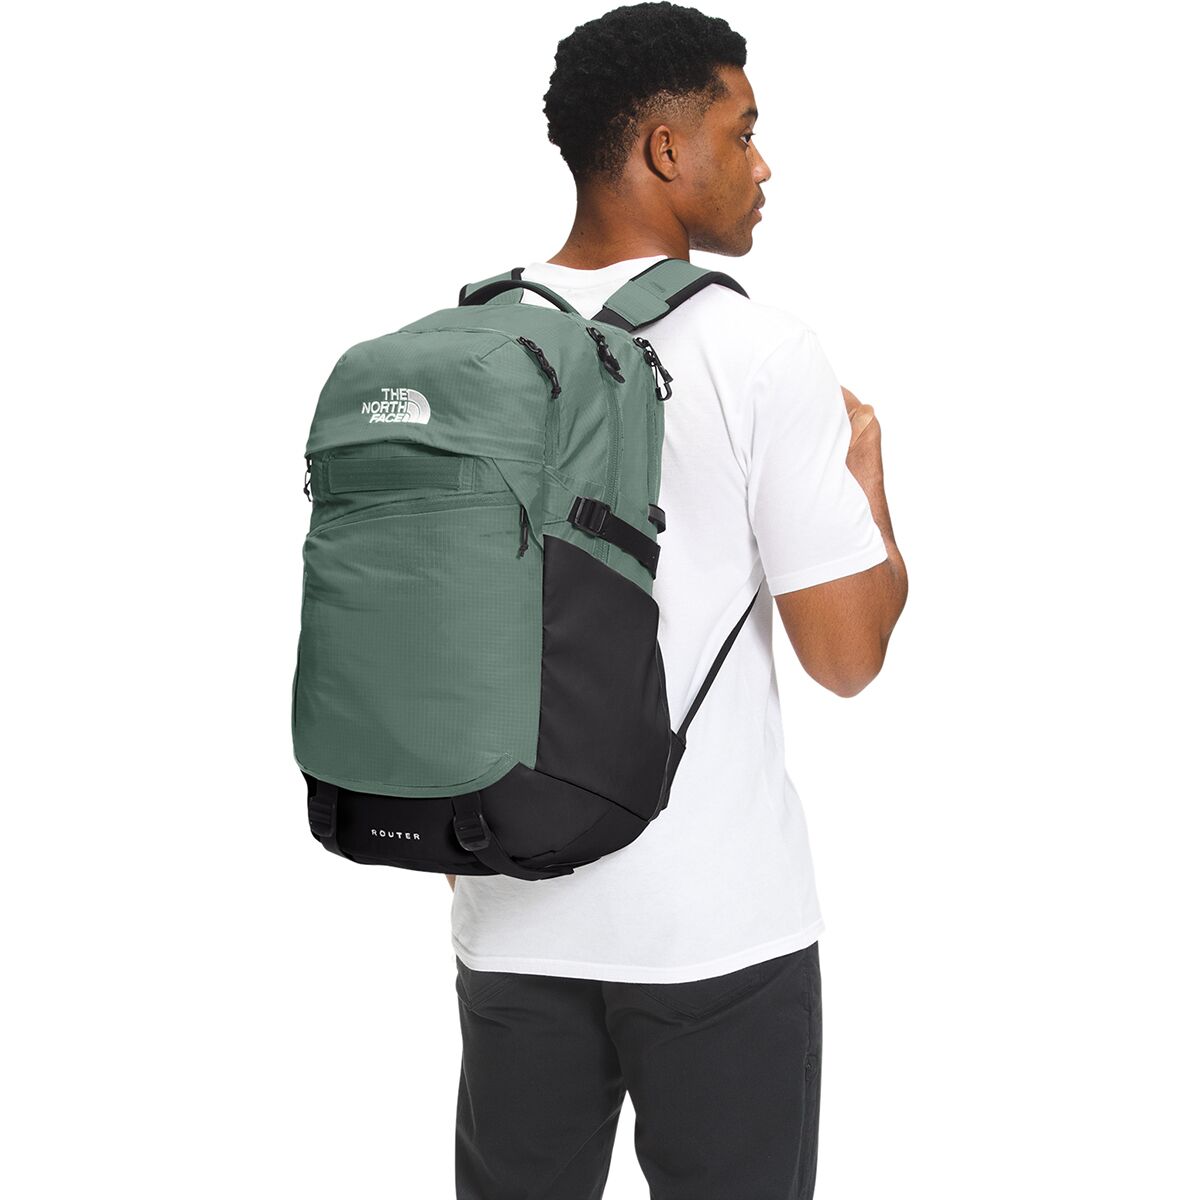 The North Face Router 40L Backpack - Accessories